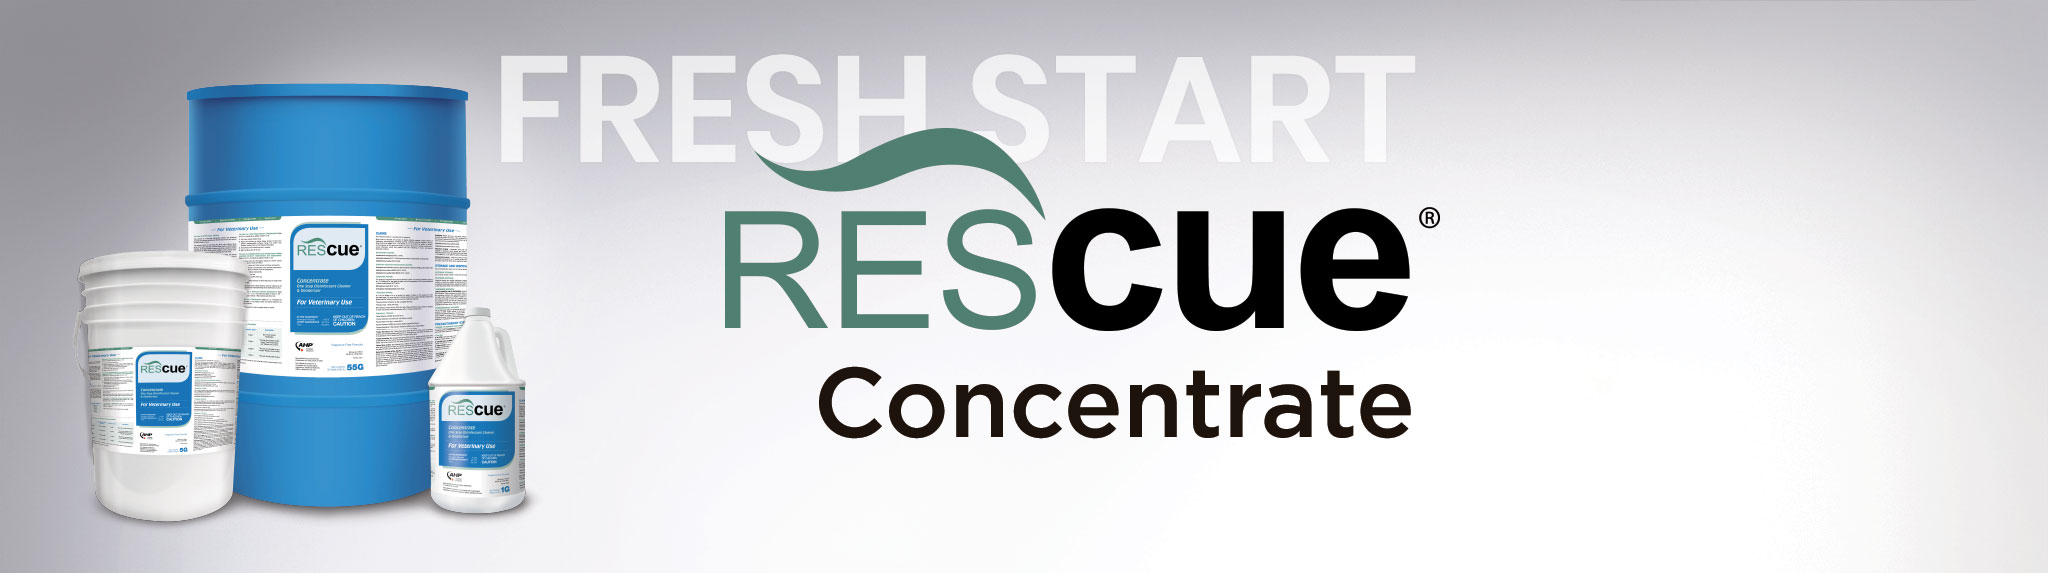 Fresh Start Rescue™ Concentrate - Concentrate products